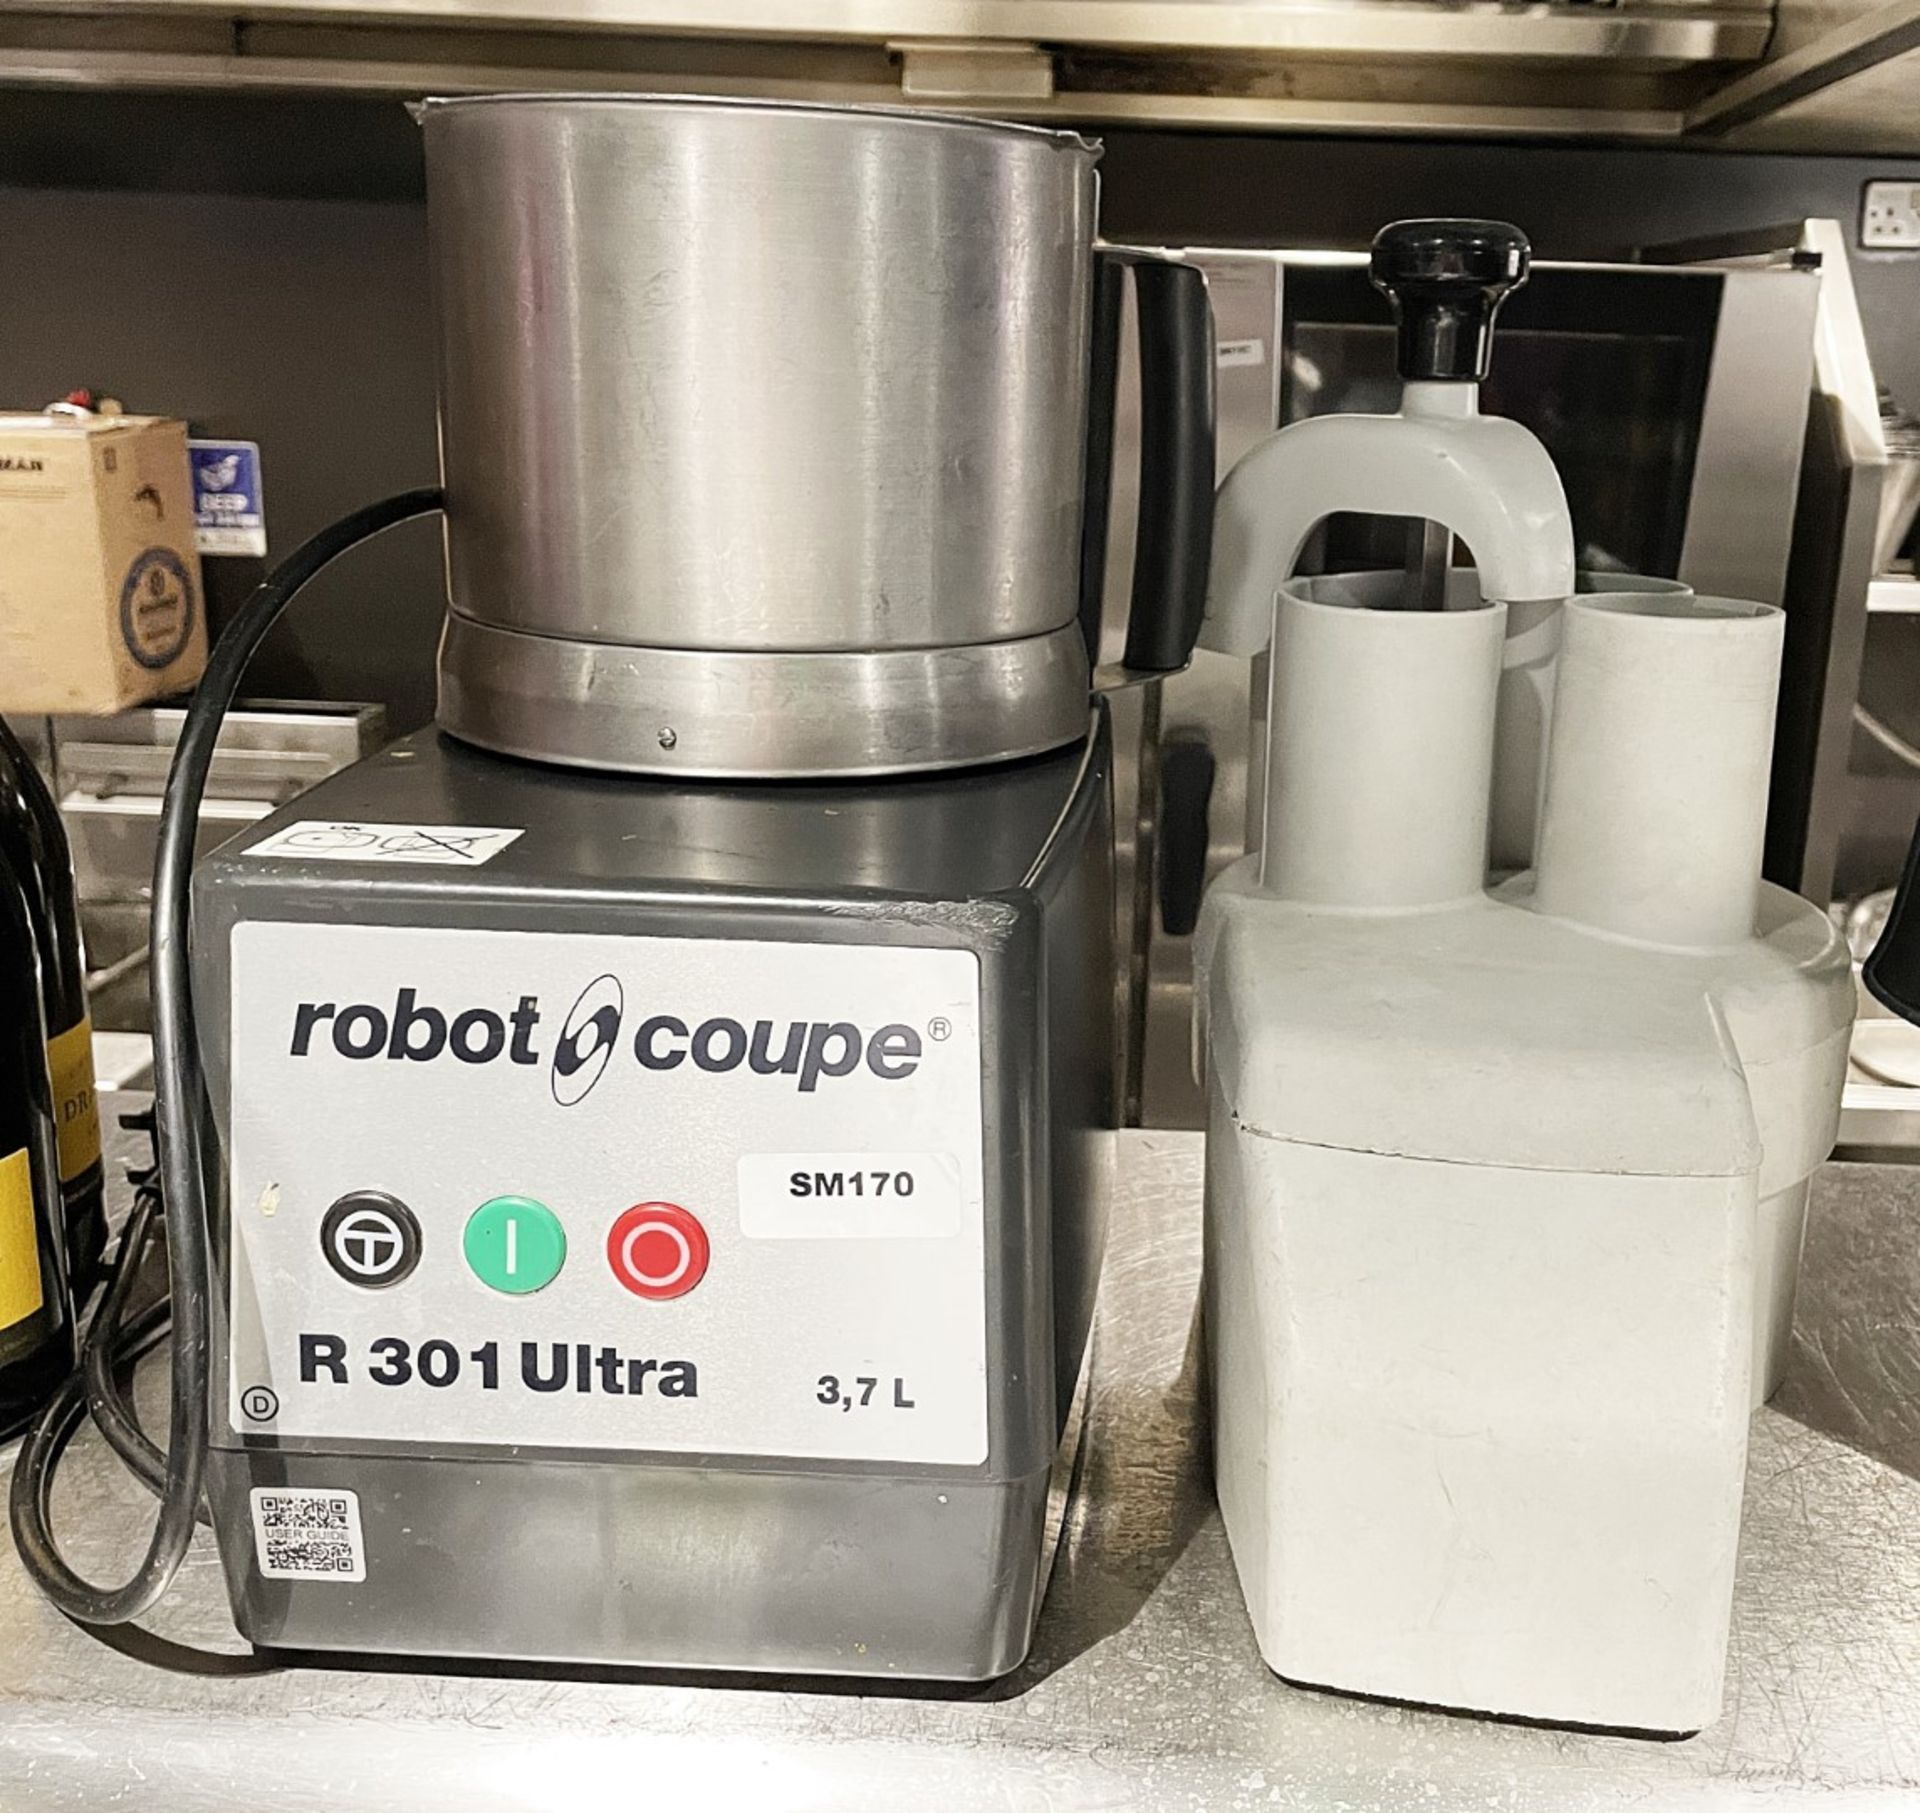 1 x Robot Coupe R301 Ultra with Assorted Attachments - RRP £1,800